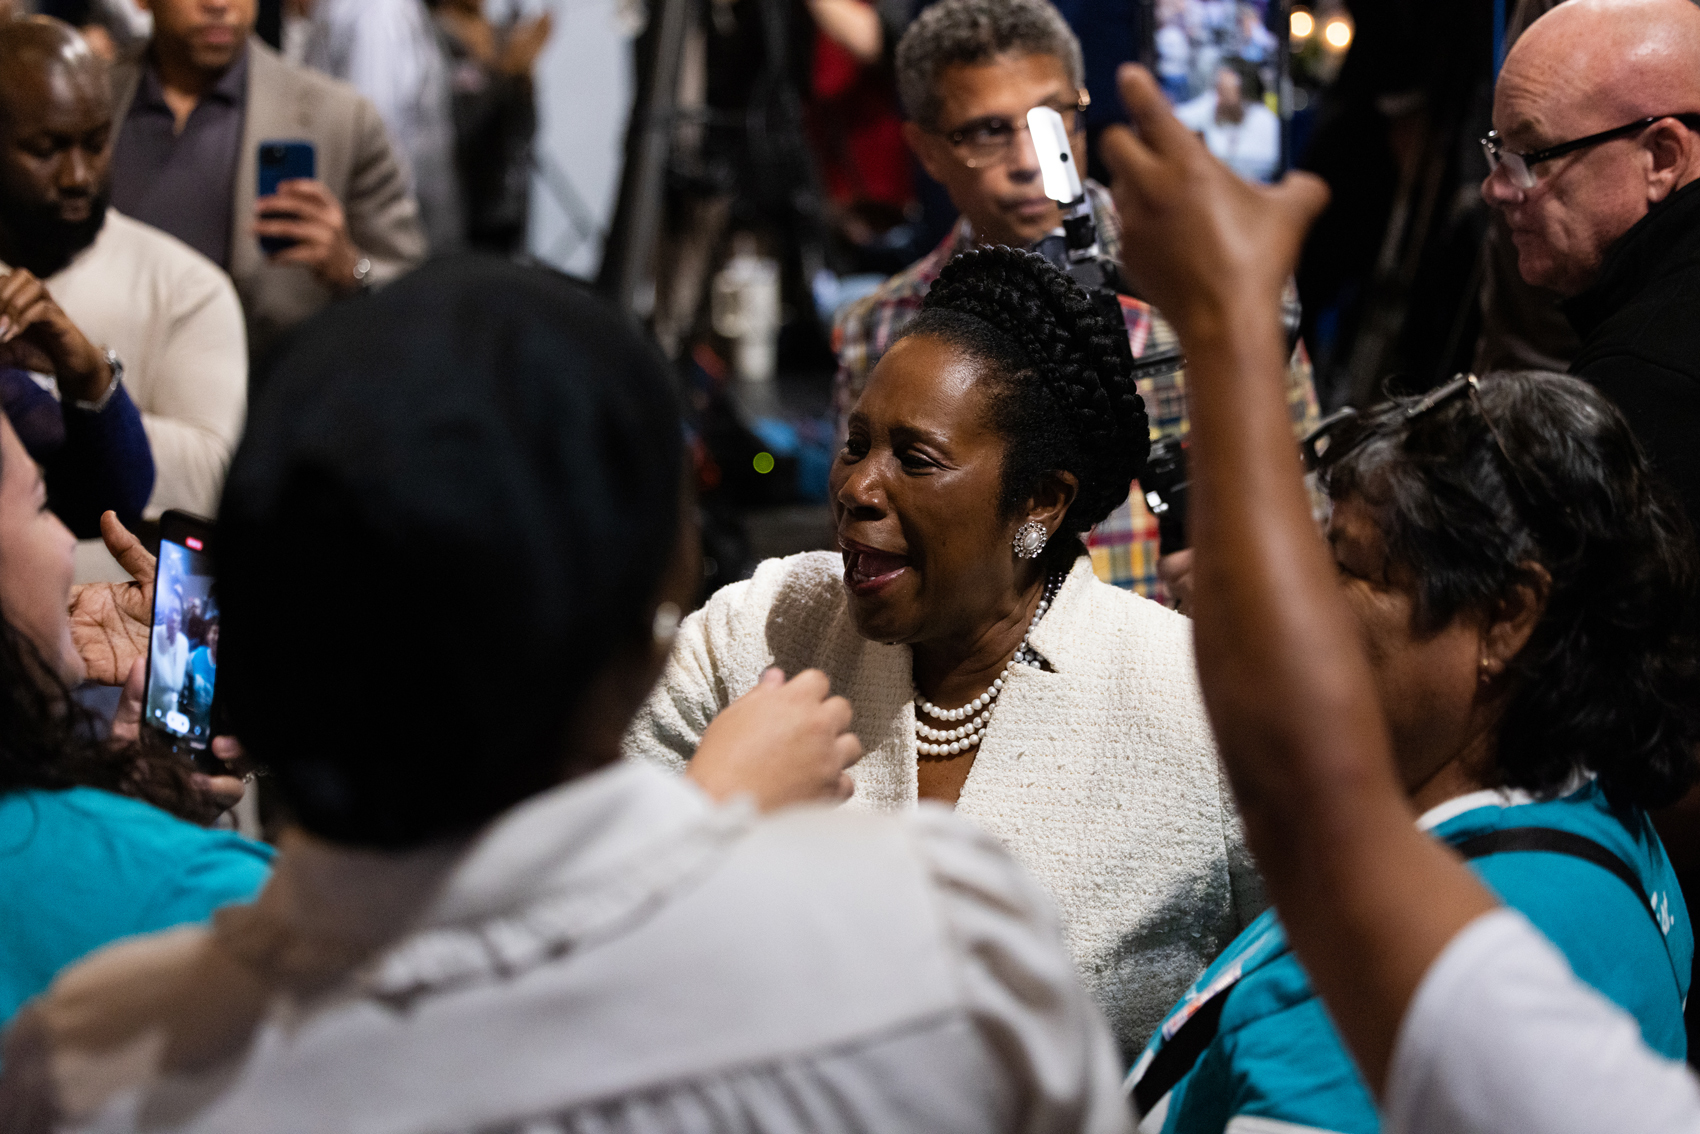 Congresswoman and Houston mayoral candidate Sheila Jackson Lee is cheered on at her election night watch party